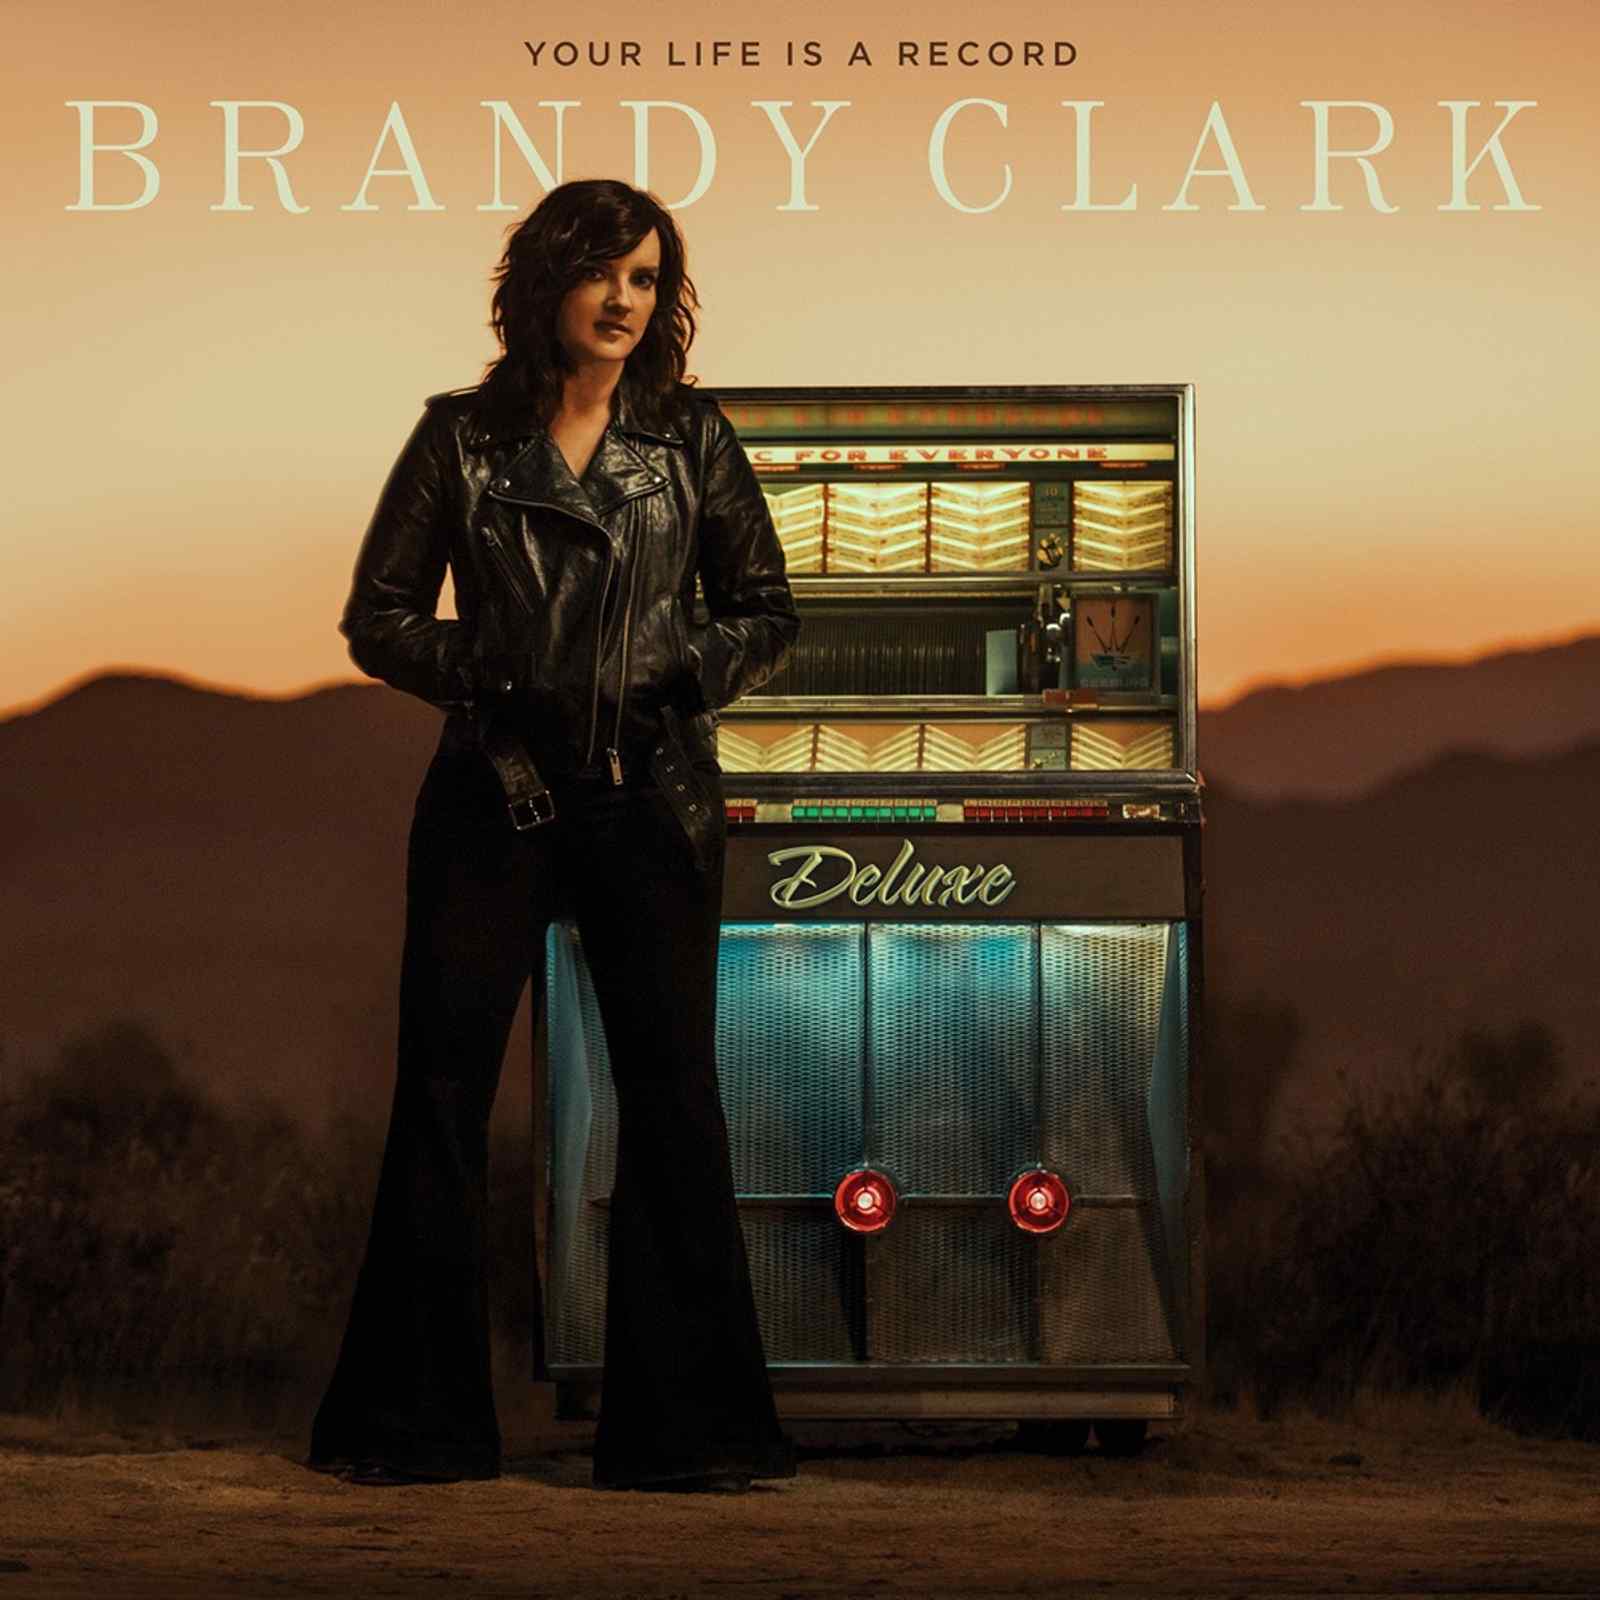 Your Life Is A Record (Deluxe) by Brandy Clark